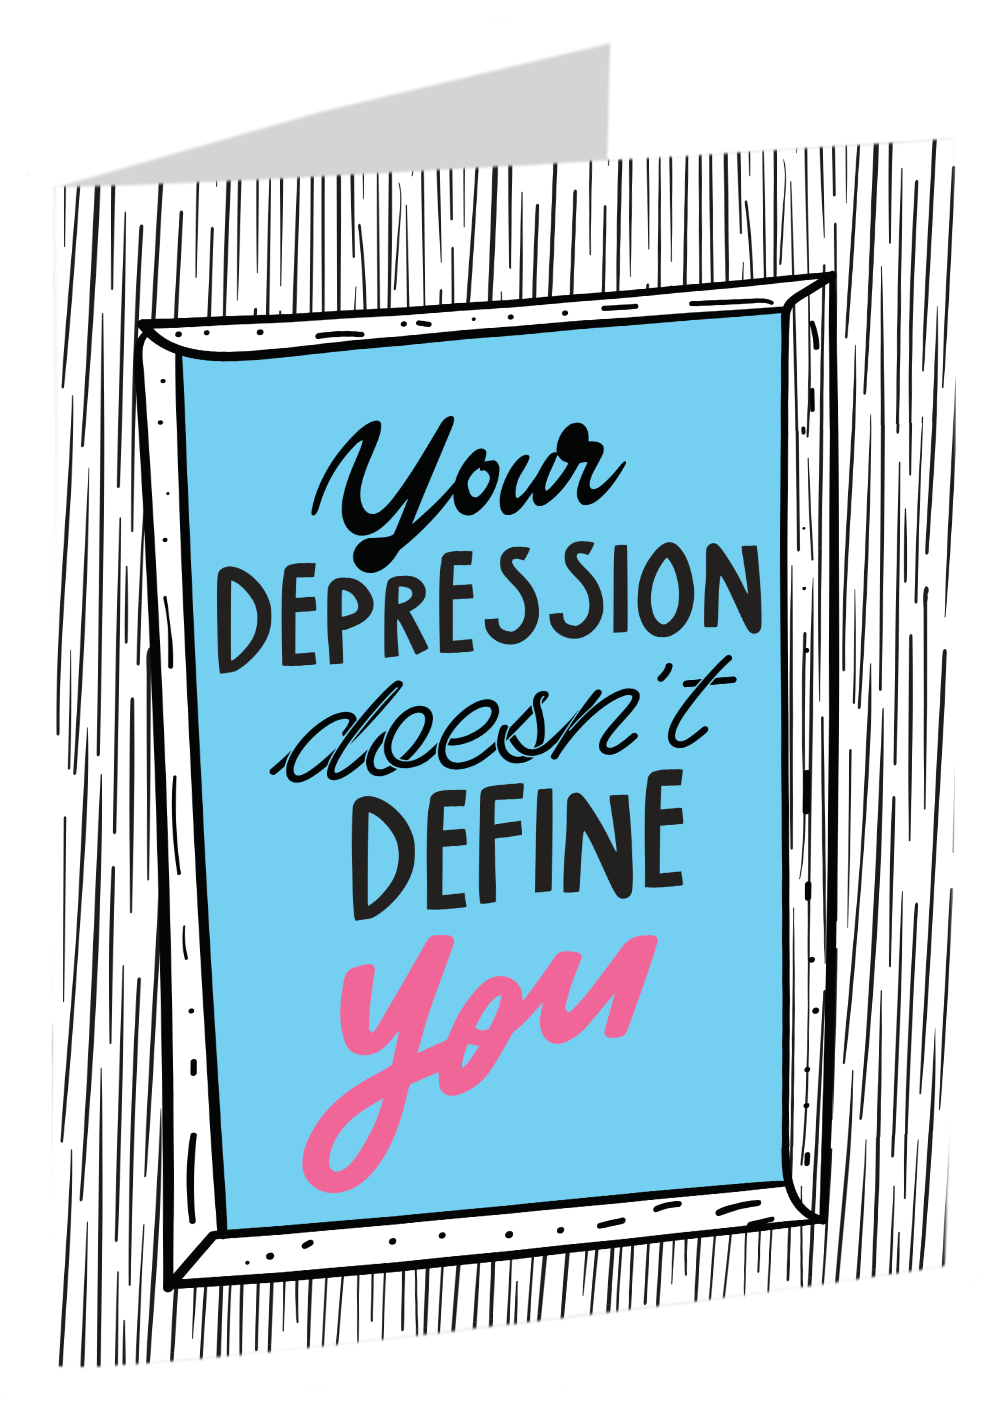 "Your Depression Doesn't Define You"